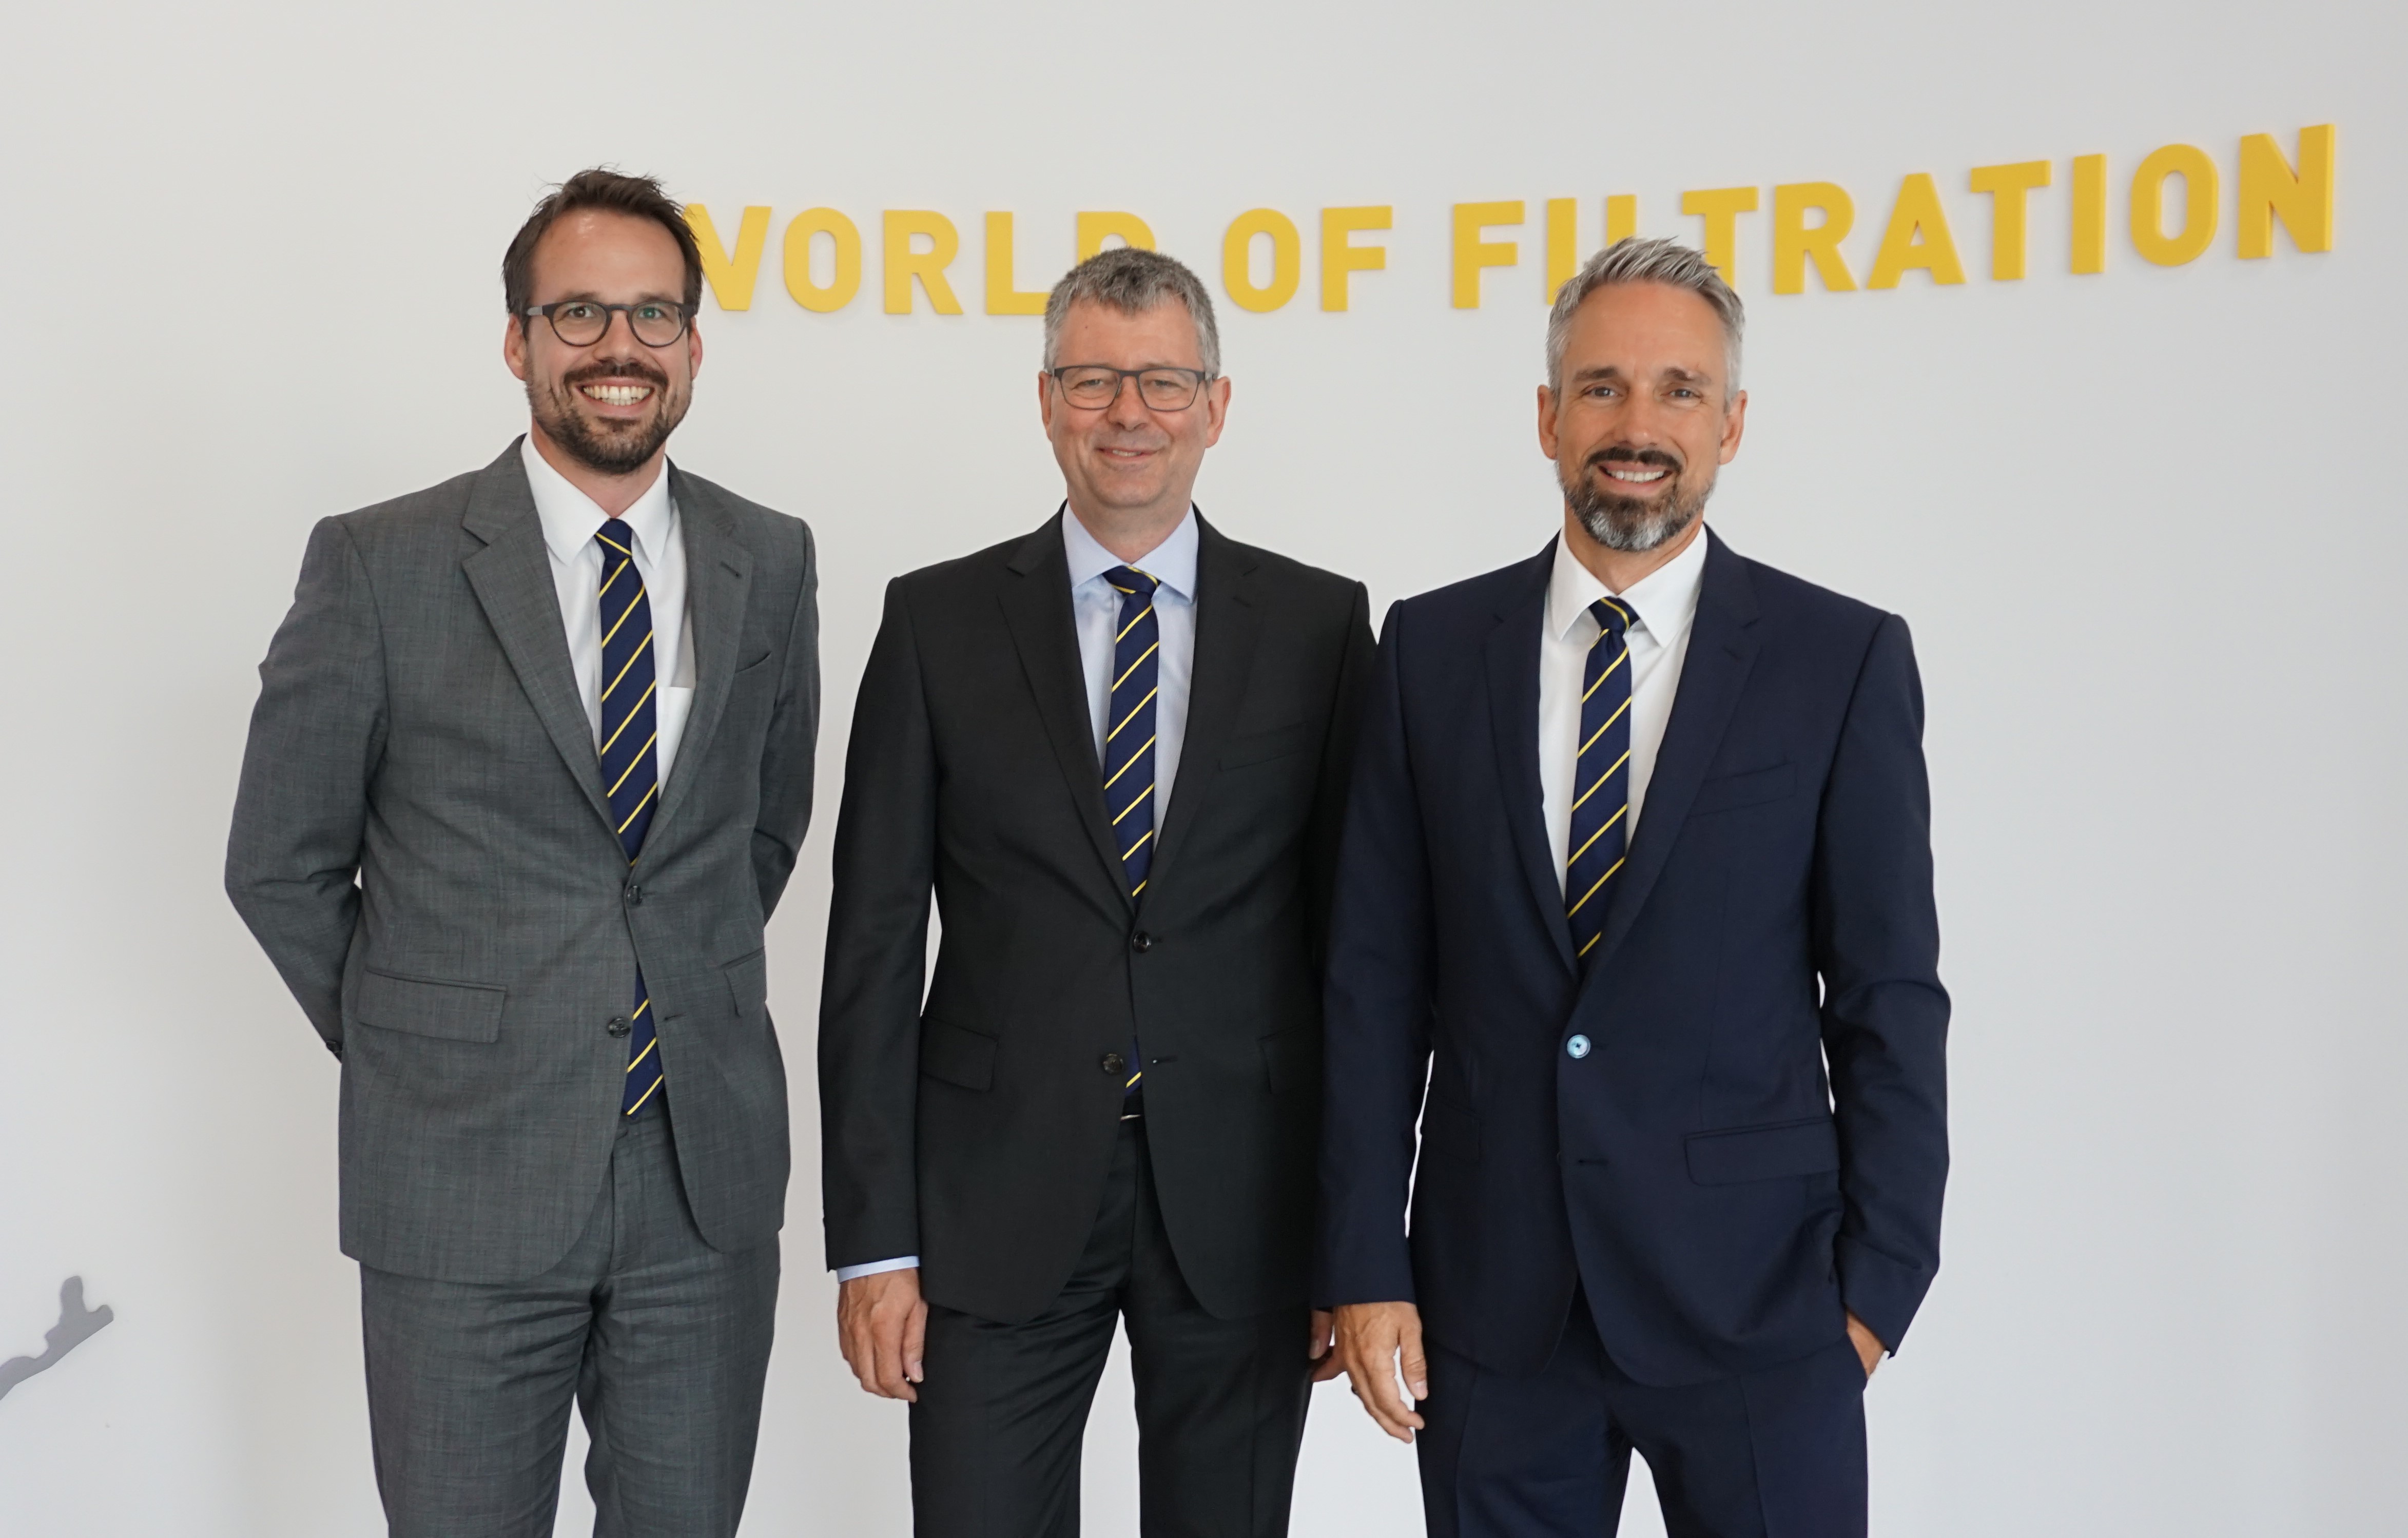 Left to right: Christopher Heine (CEO), Dr Thomas Netsch (group vice president of Industrial Filtration), and Jens Röttgering (owner and chairman of the board).